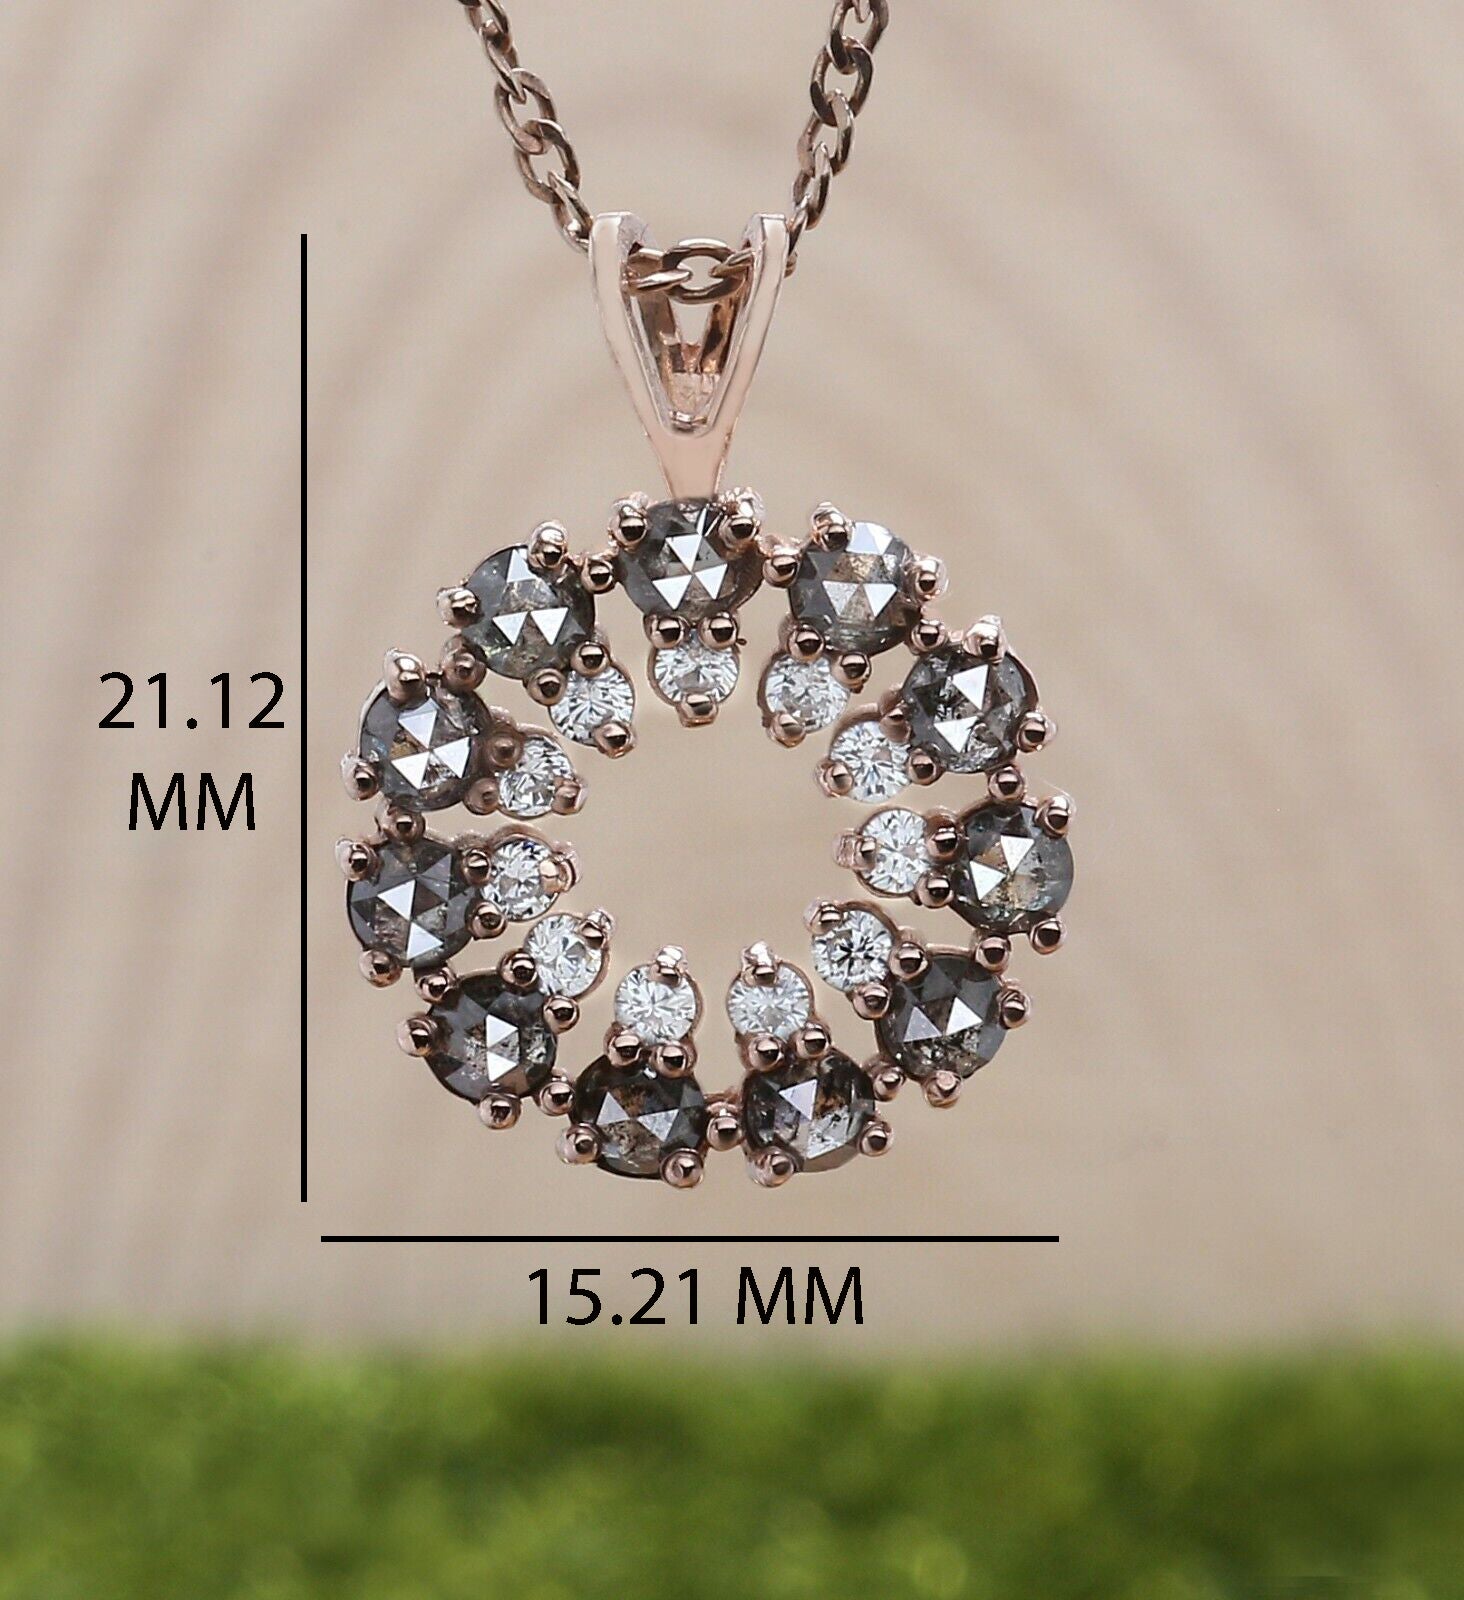 Round Rose Cut Salt And Pepper Diamond Pendant, Unique Diamond Pendant, Rose Cut Diamond Pendant, No Chain Including Only Pendant KDK1150